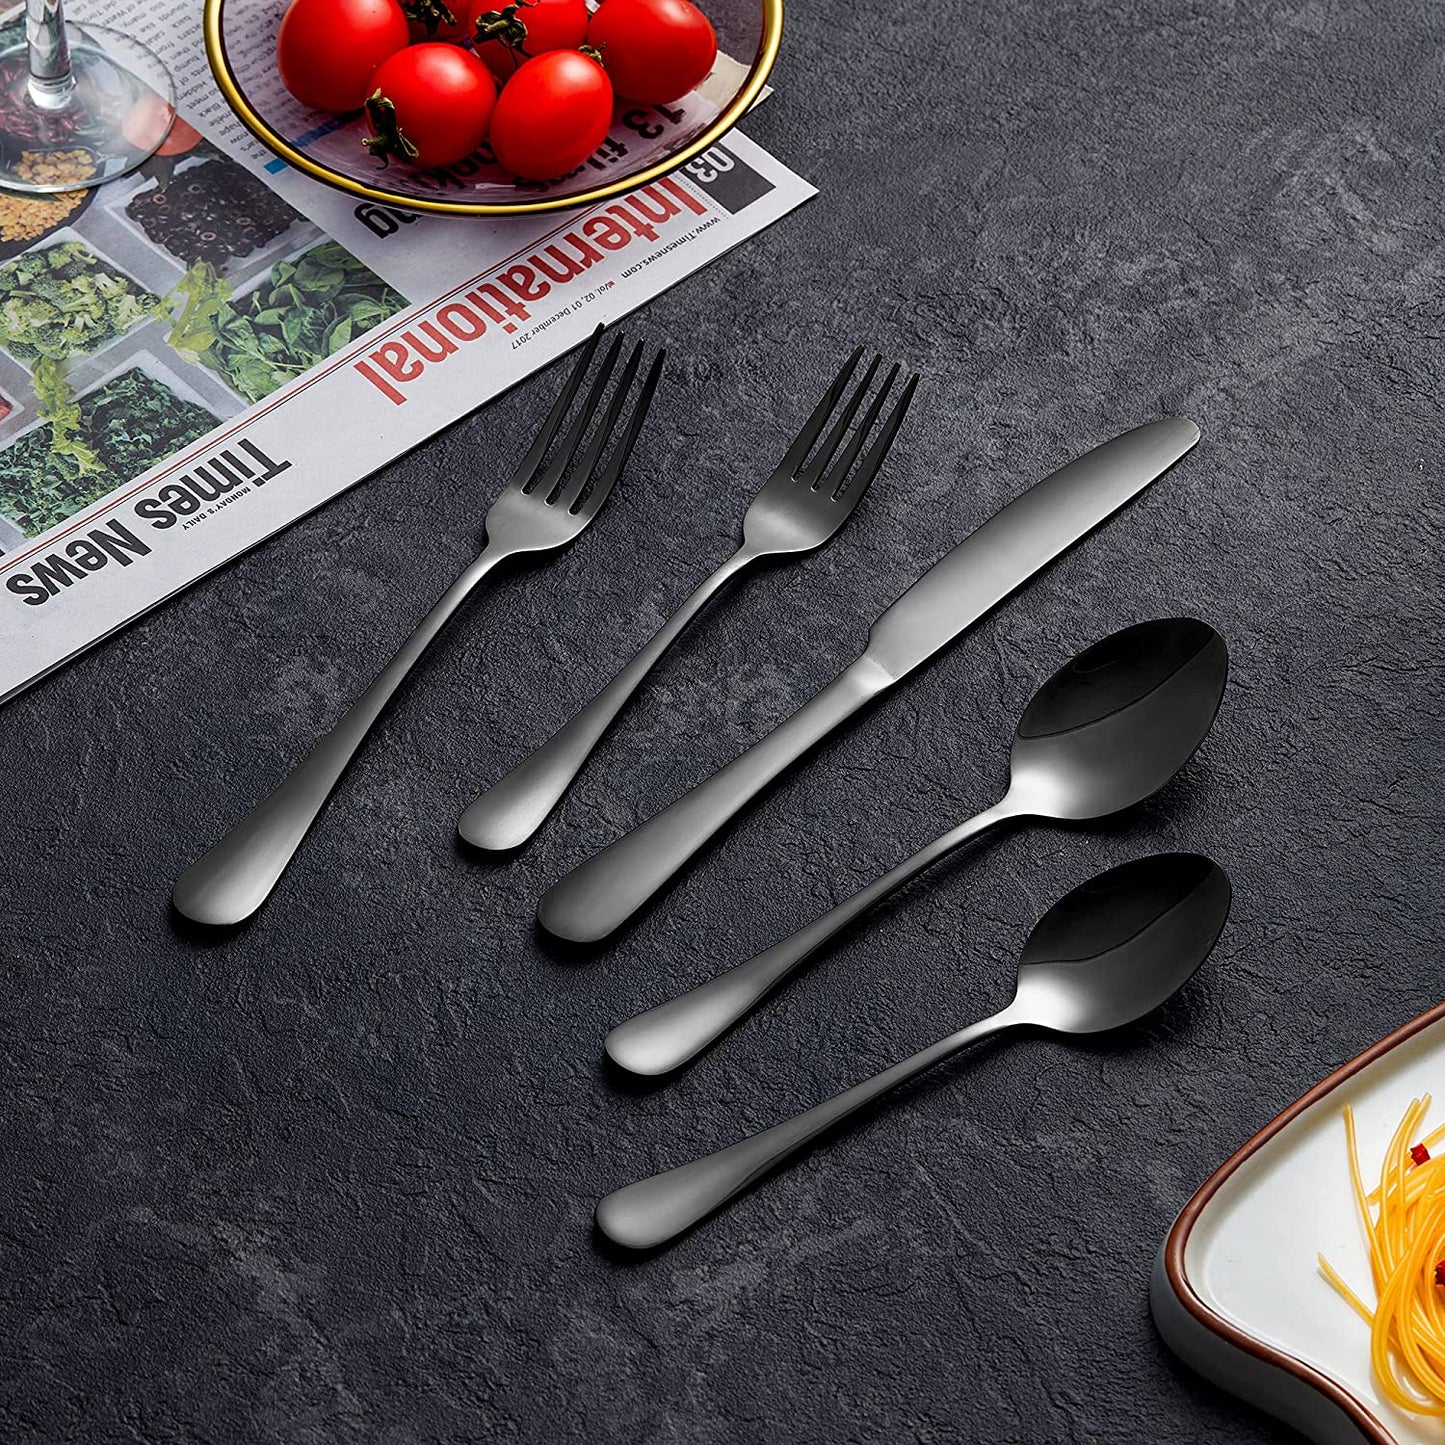 MFW Silverware Flatware Cultery Set, MFW 20-piece Stainless Steel Tableware Eating Utensil Set for 4, Include Spoons Forks Knives, Mirror finish, Dishwasher Safe-Black